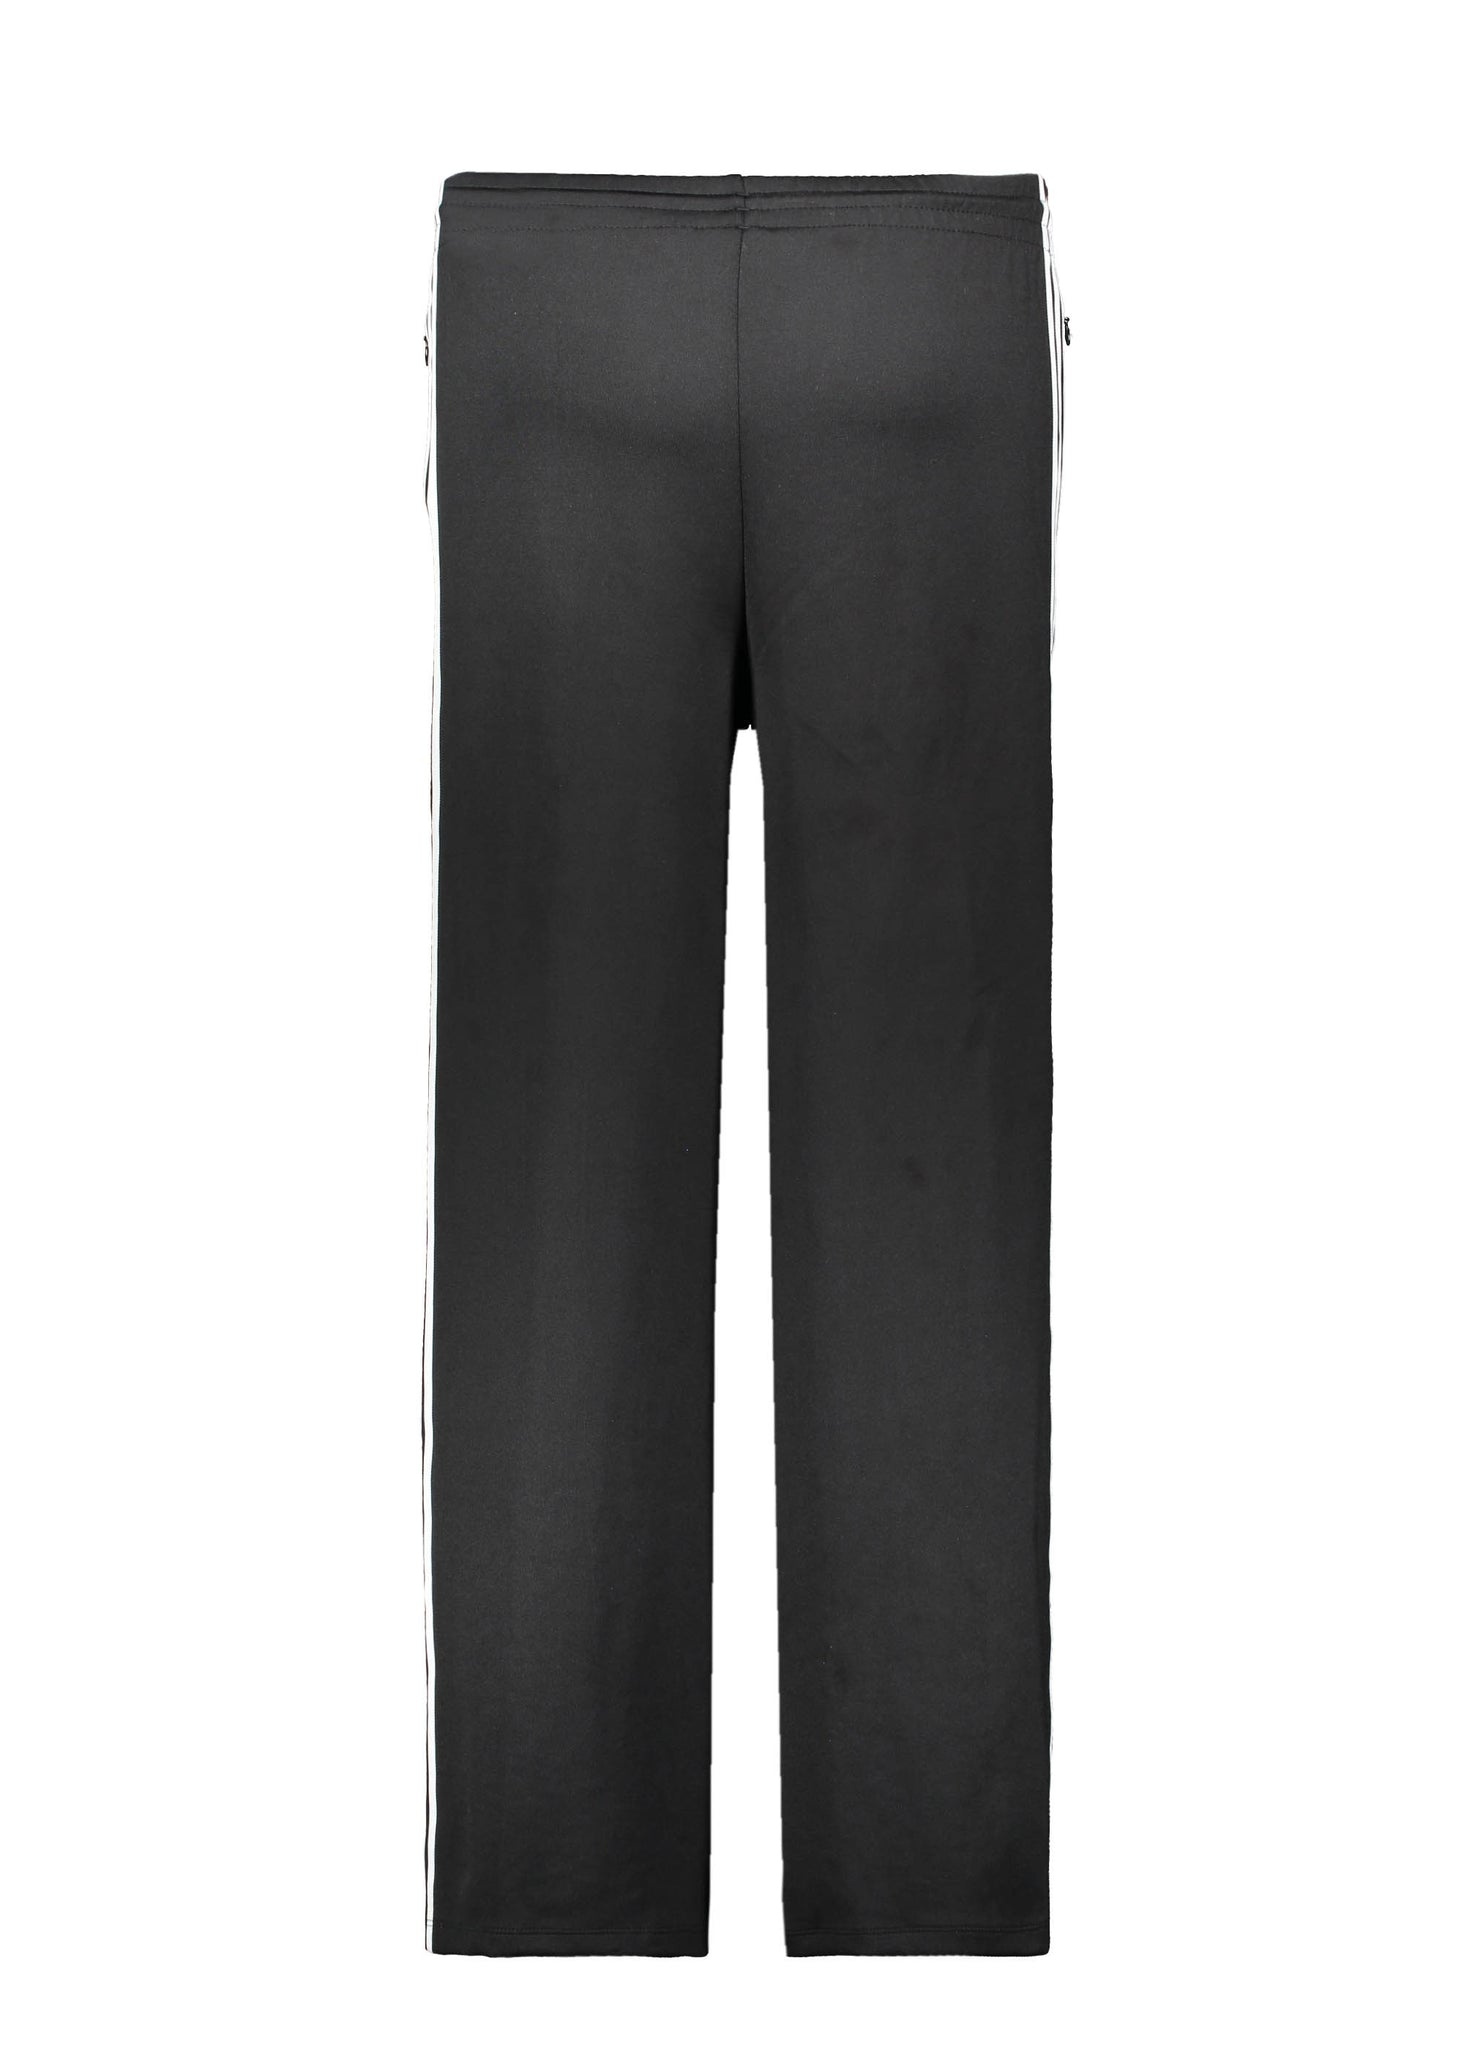 Adidas Relaxed Pants - Black